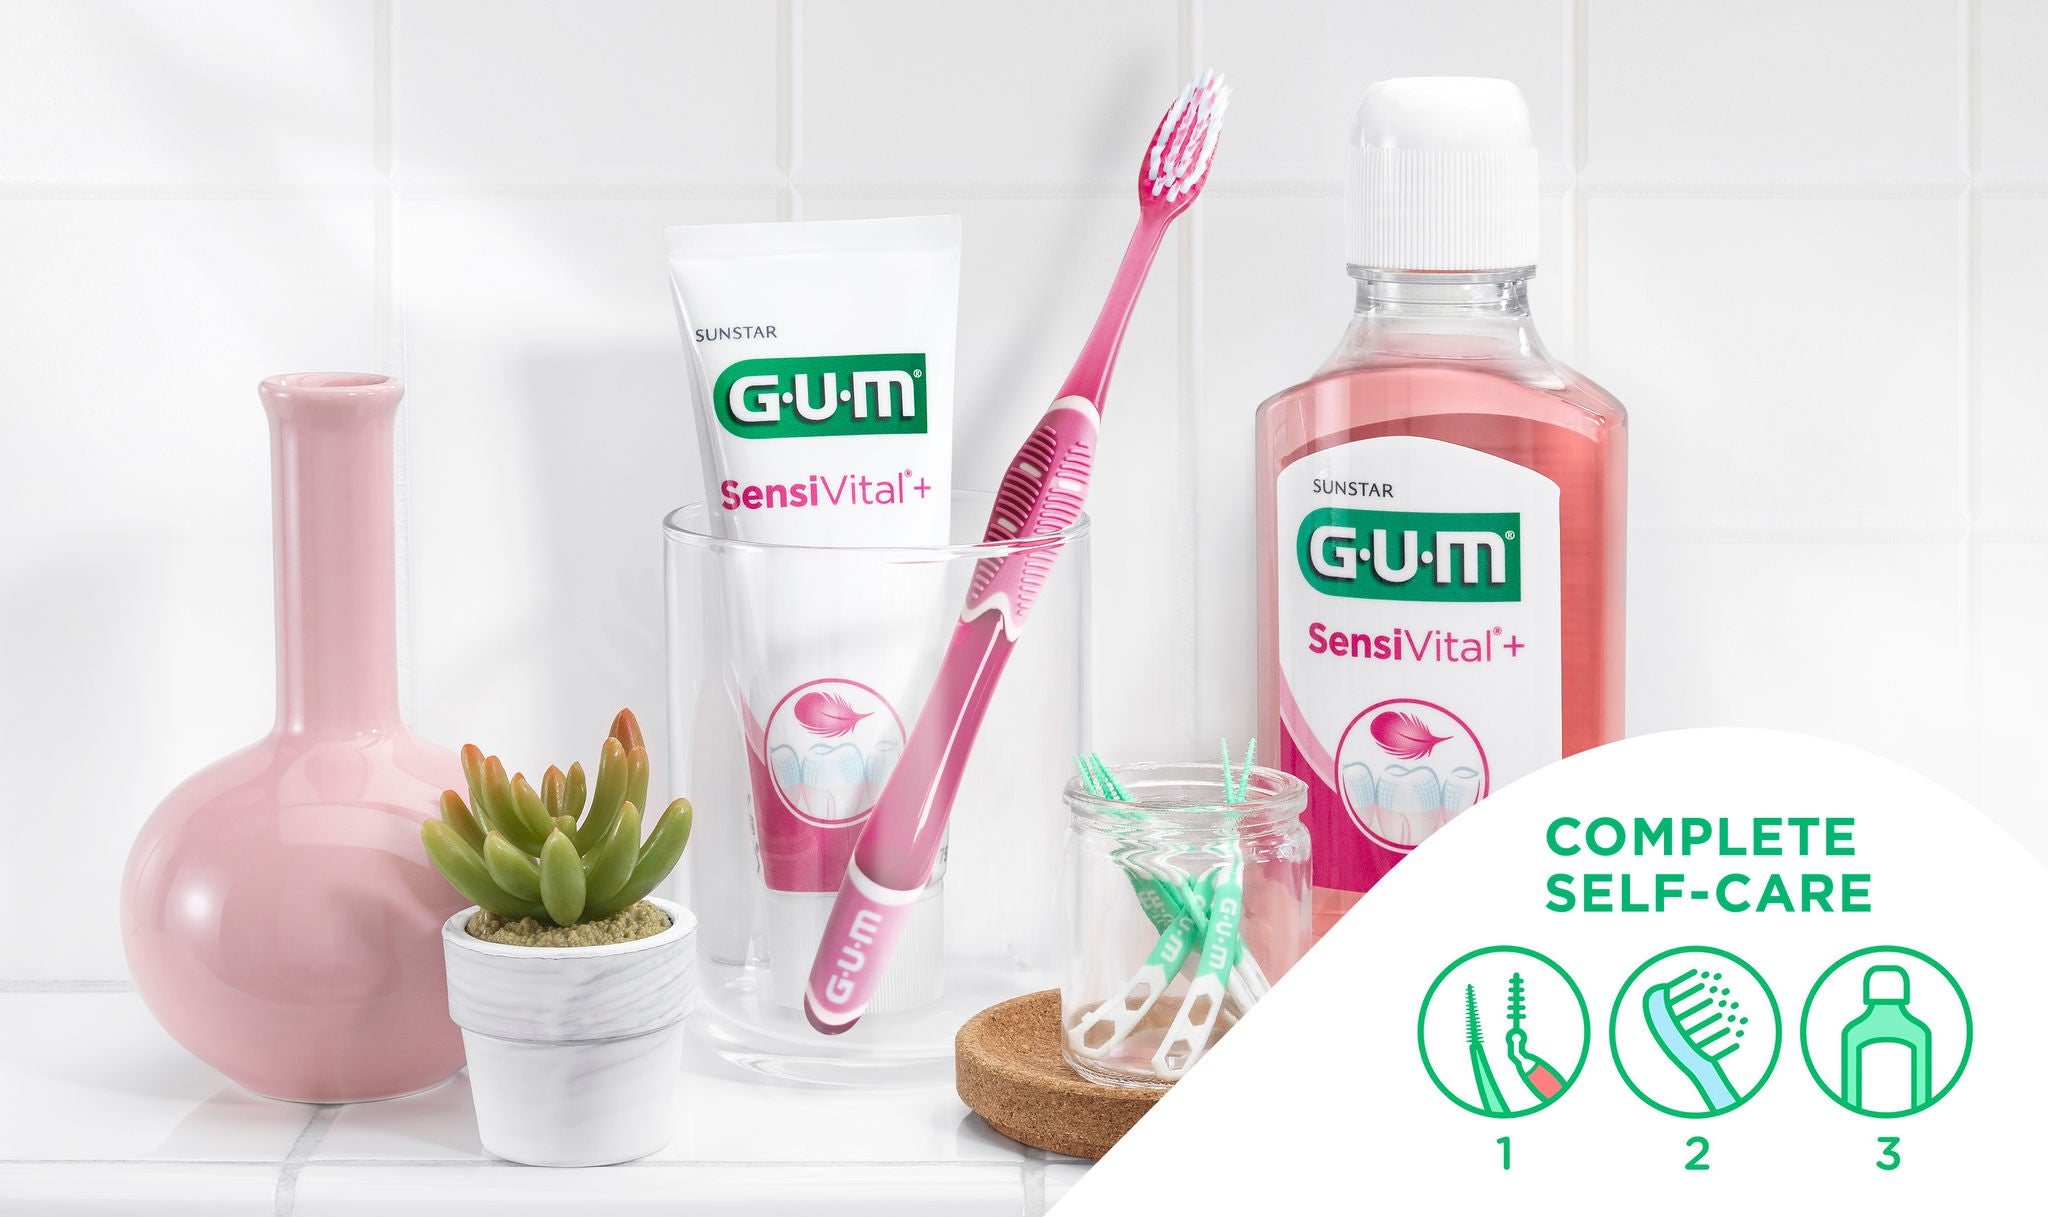 In-context-GUM-PRO--SENSITIVE-TB-with-SensiVital+Toothpaste-and-mouthwash-for-the-complete-self-care-in-the-bathroom.jpg